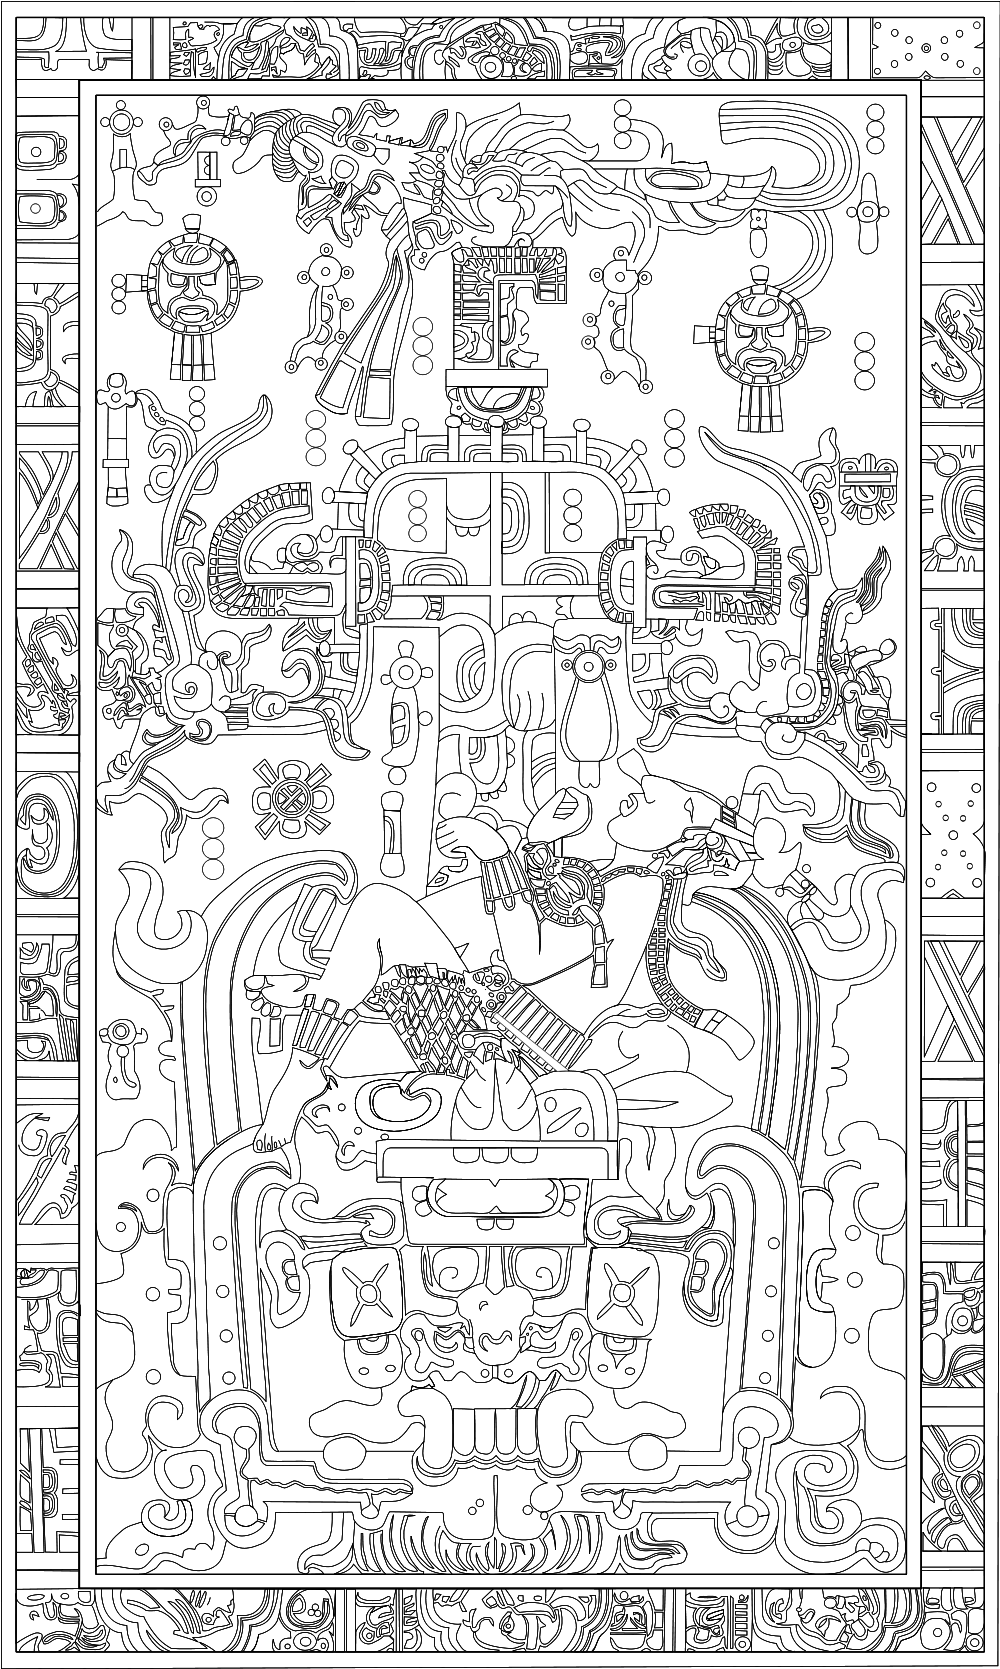 Pakal the Great tomb lid